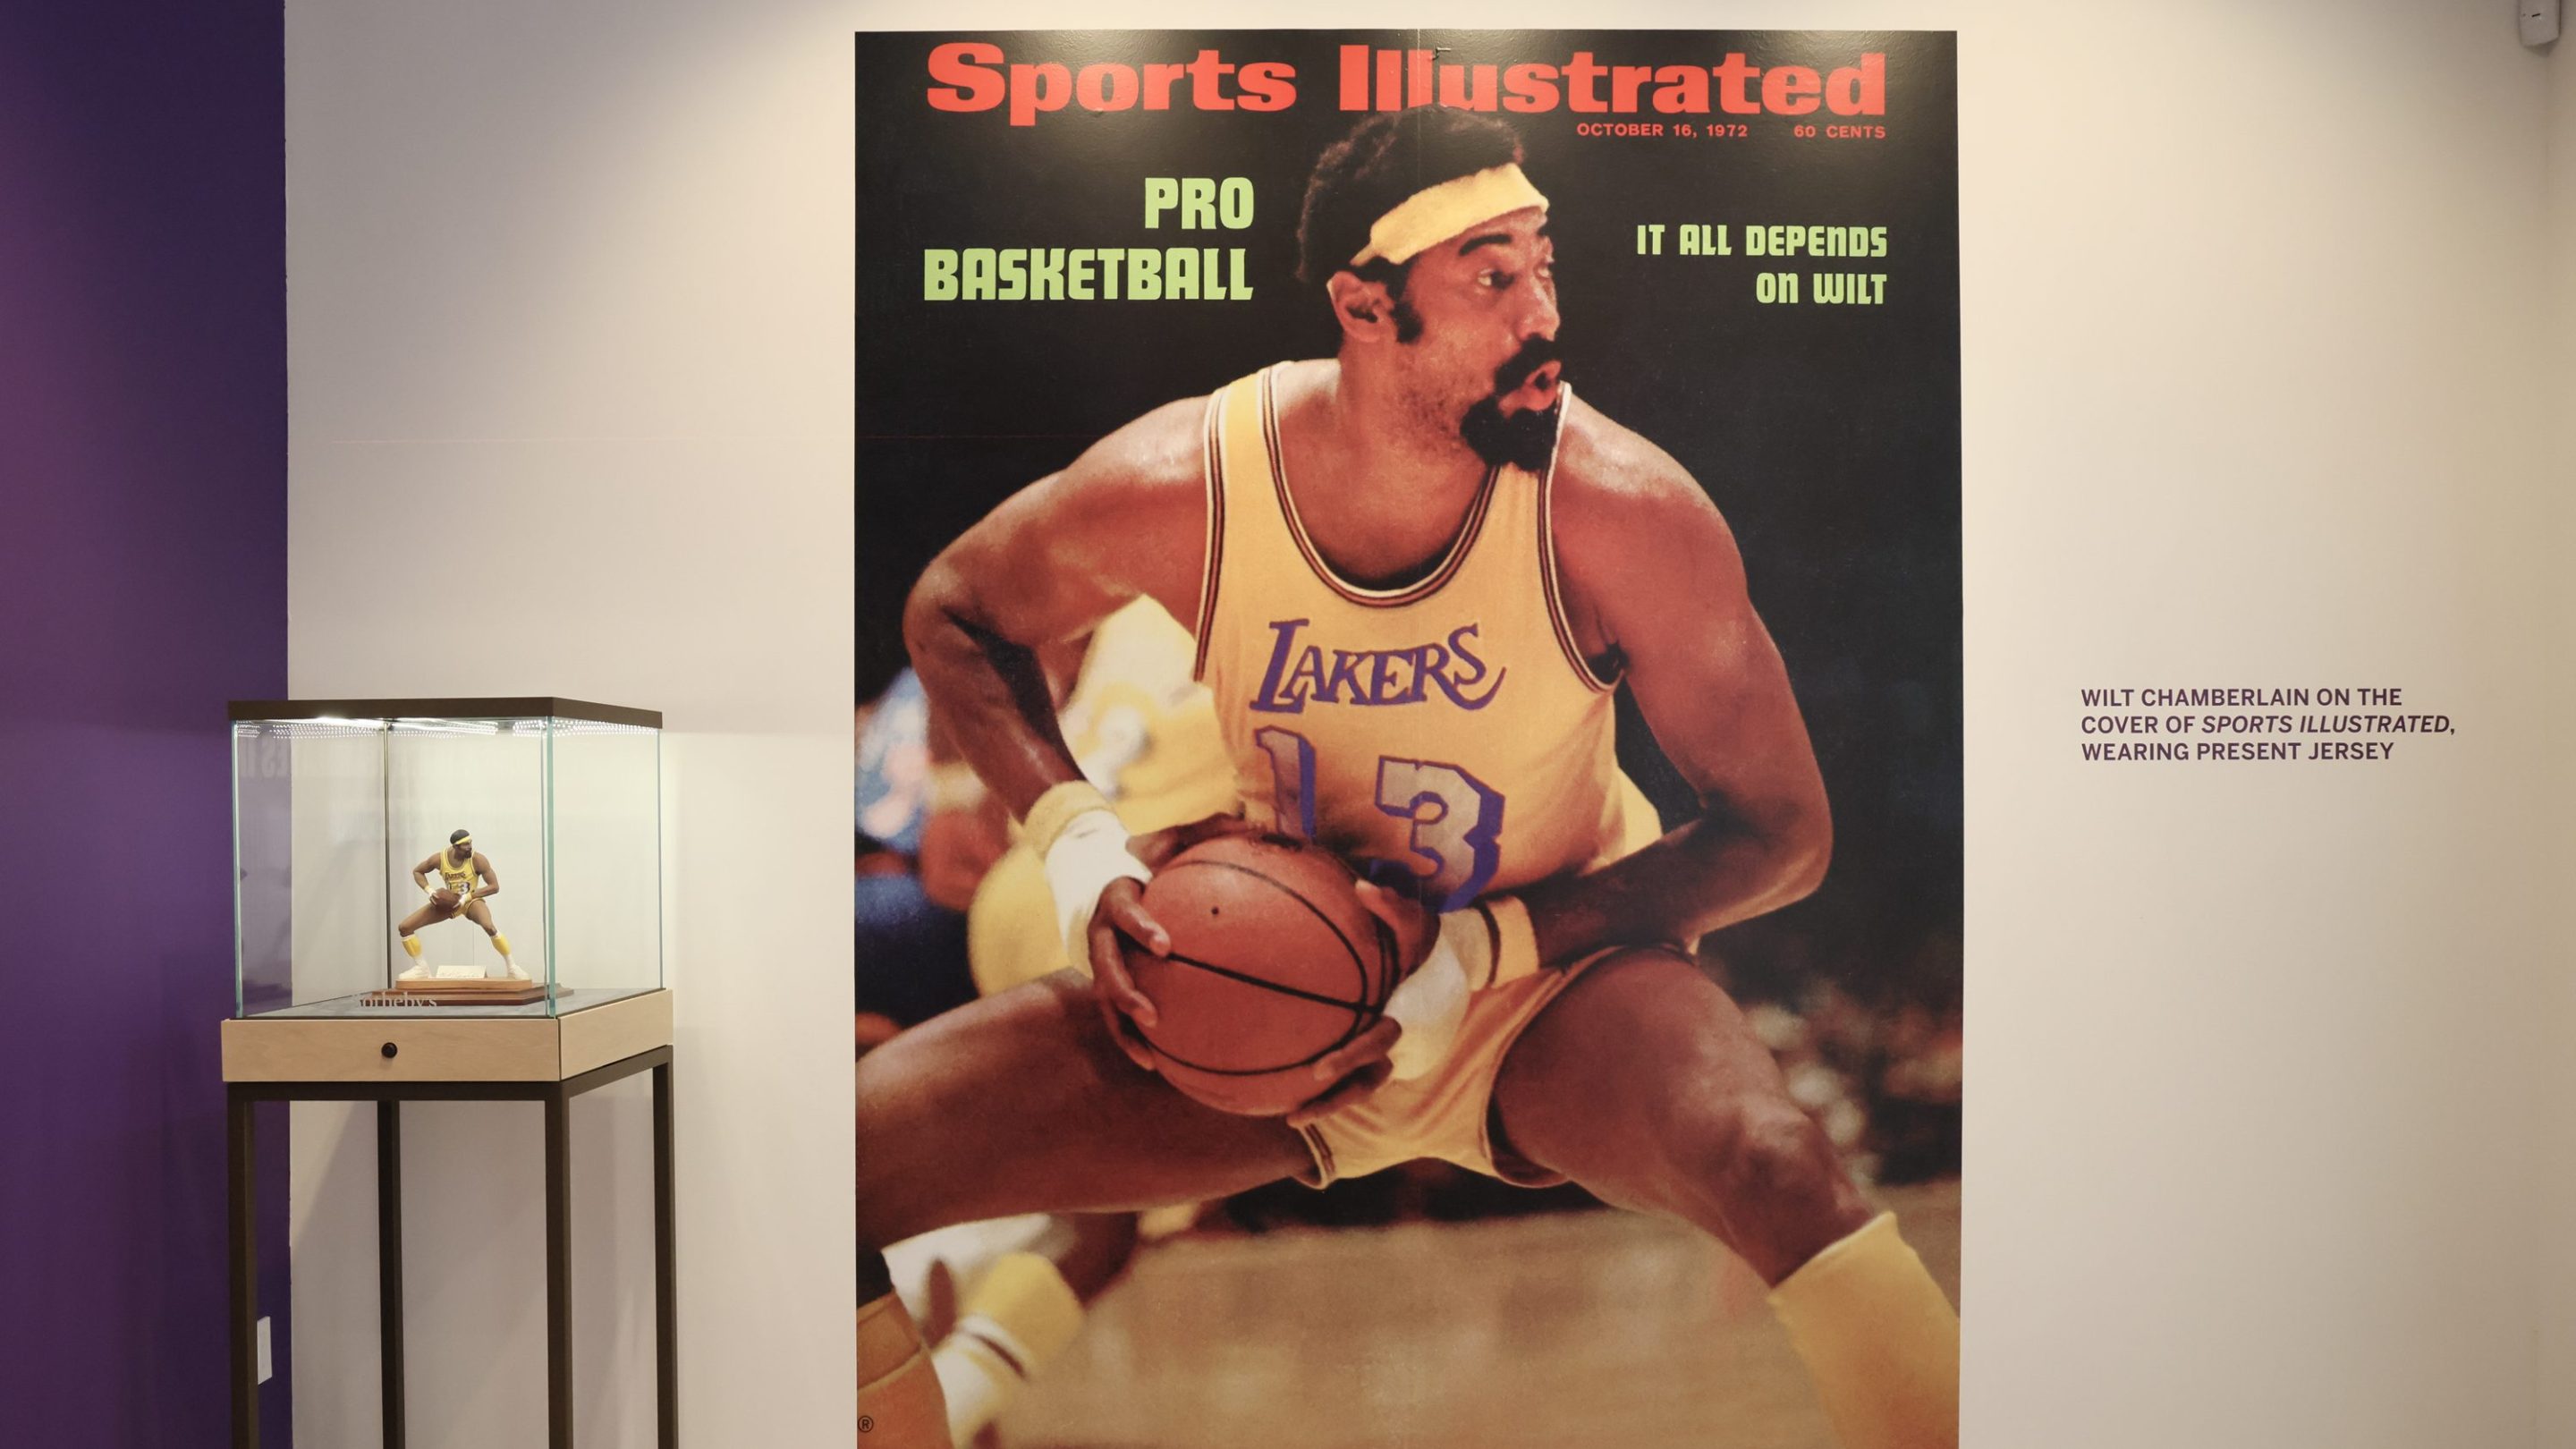 October 16, 1972 Sports Illustrated cover and signed limited edition Wilt Chamberlain sports porcelain figurine on display during the press preview at Sotheby's Auction House on August 01, 2023 in Los Angeles, California.